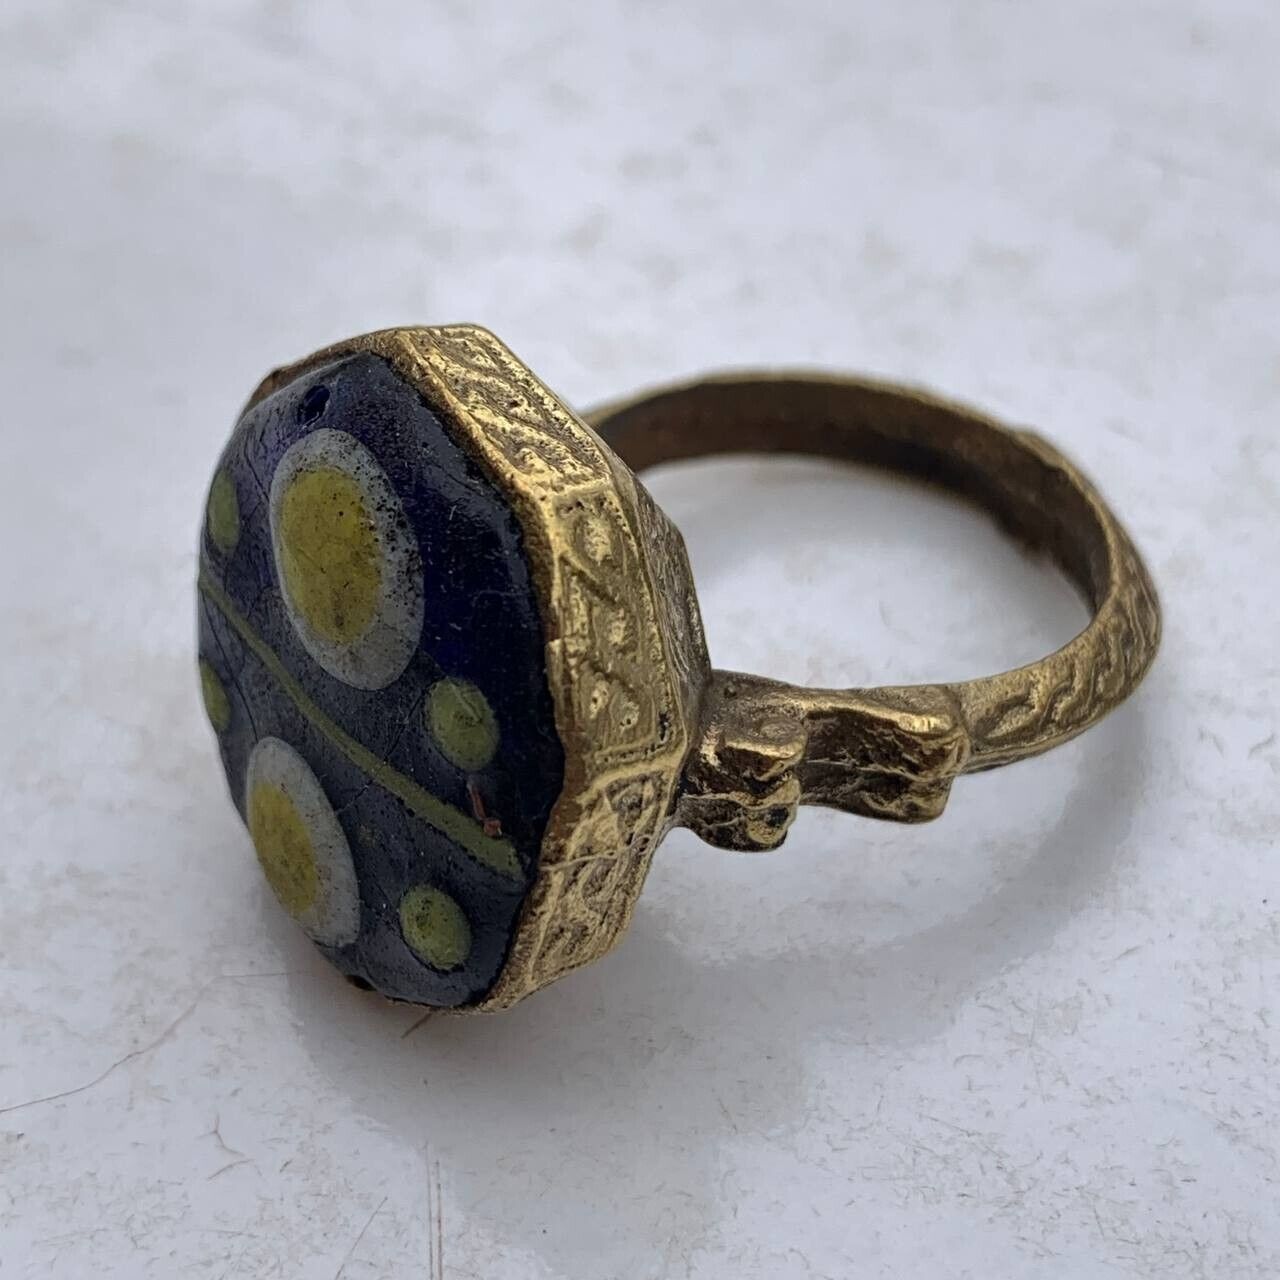 Ancient Old Bronze Antique Ring Roman Arabia With Evil Eye Stone Artifact Rare